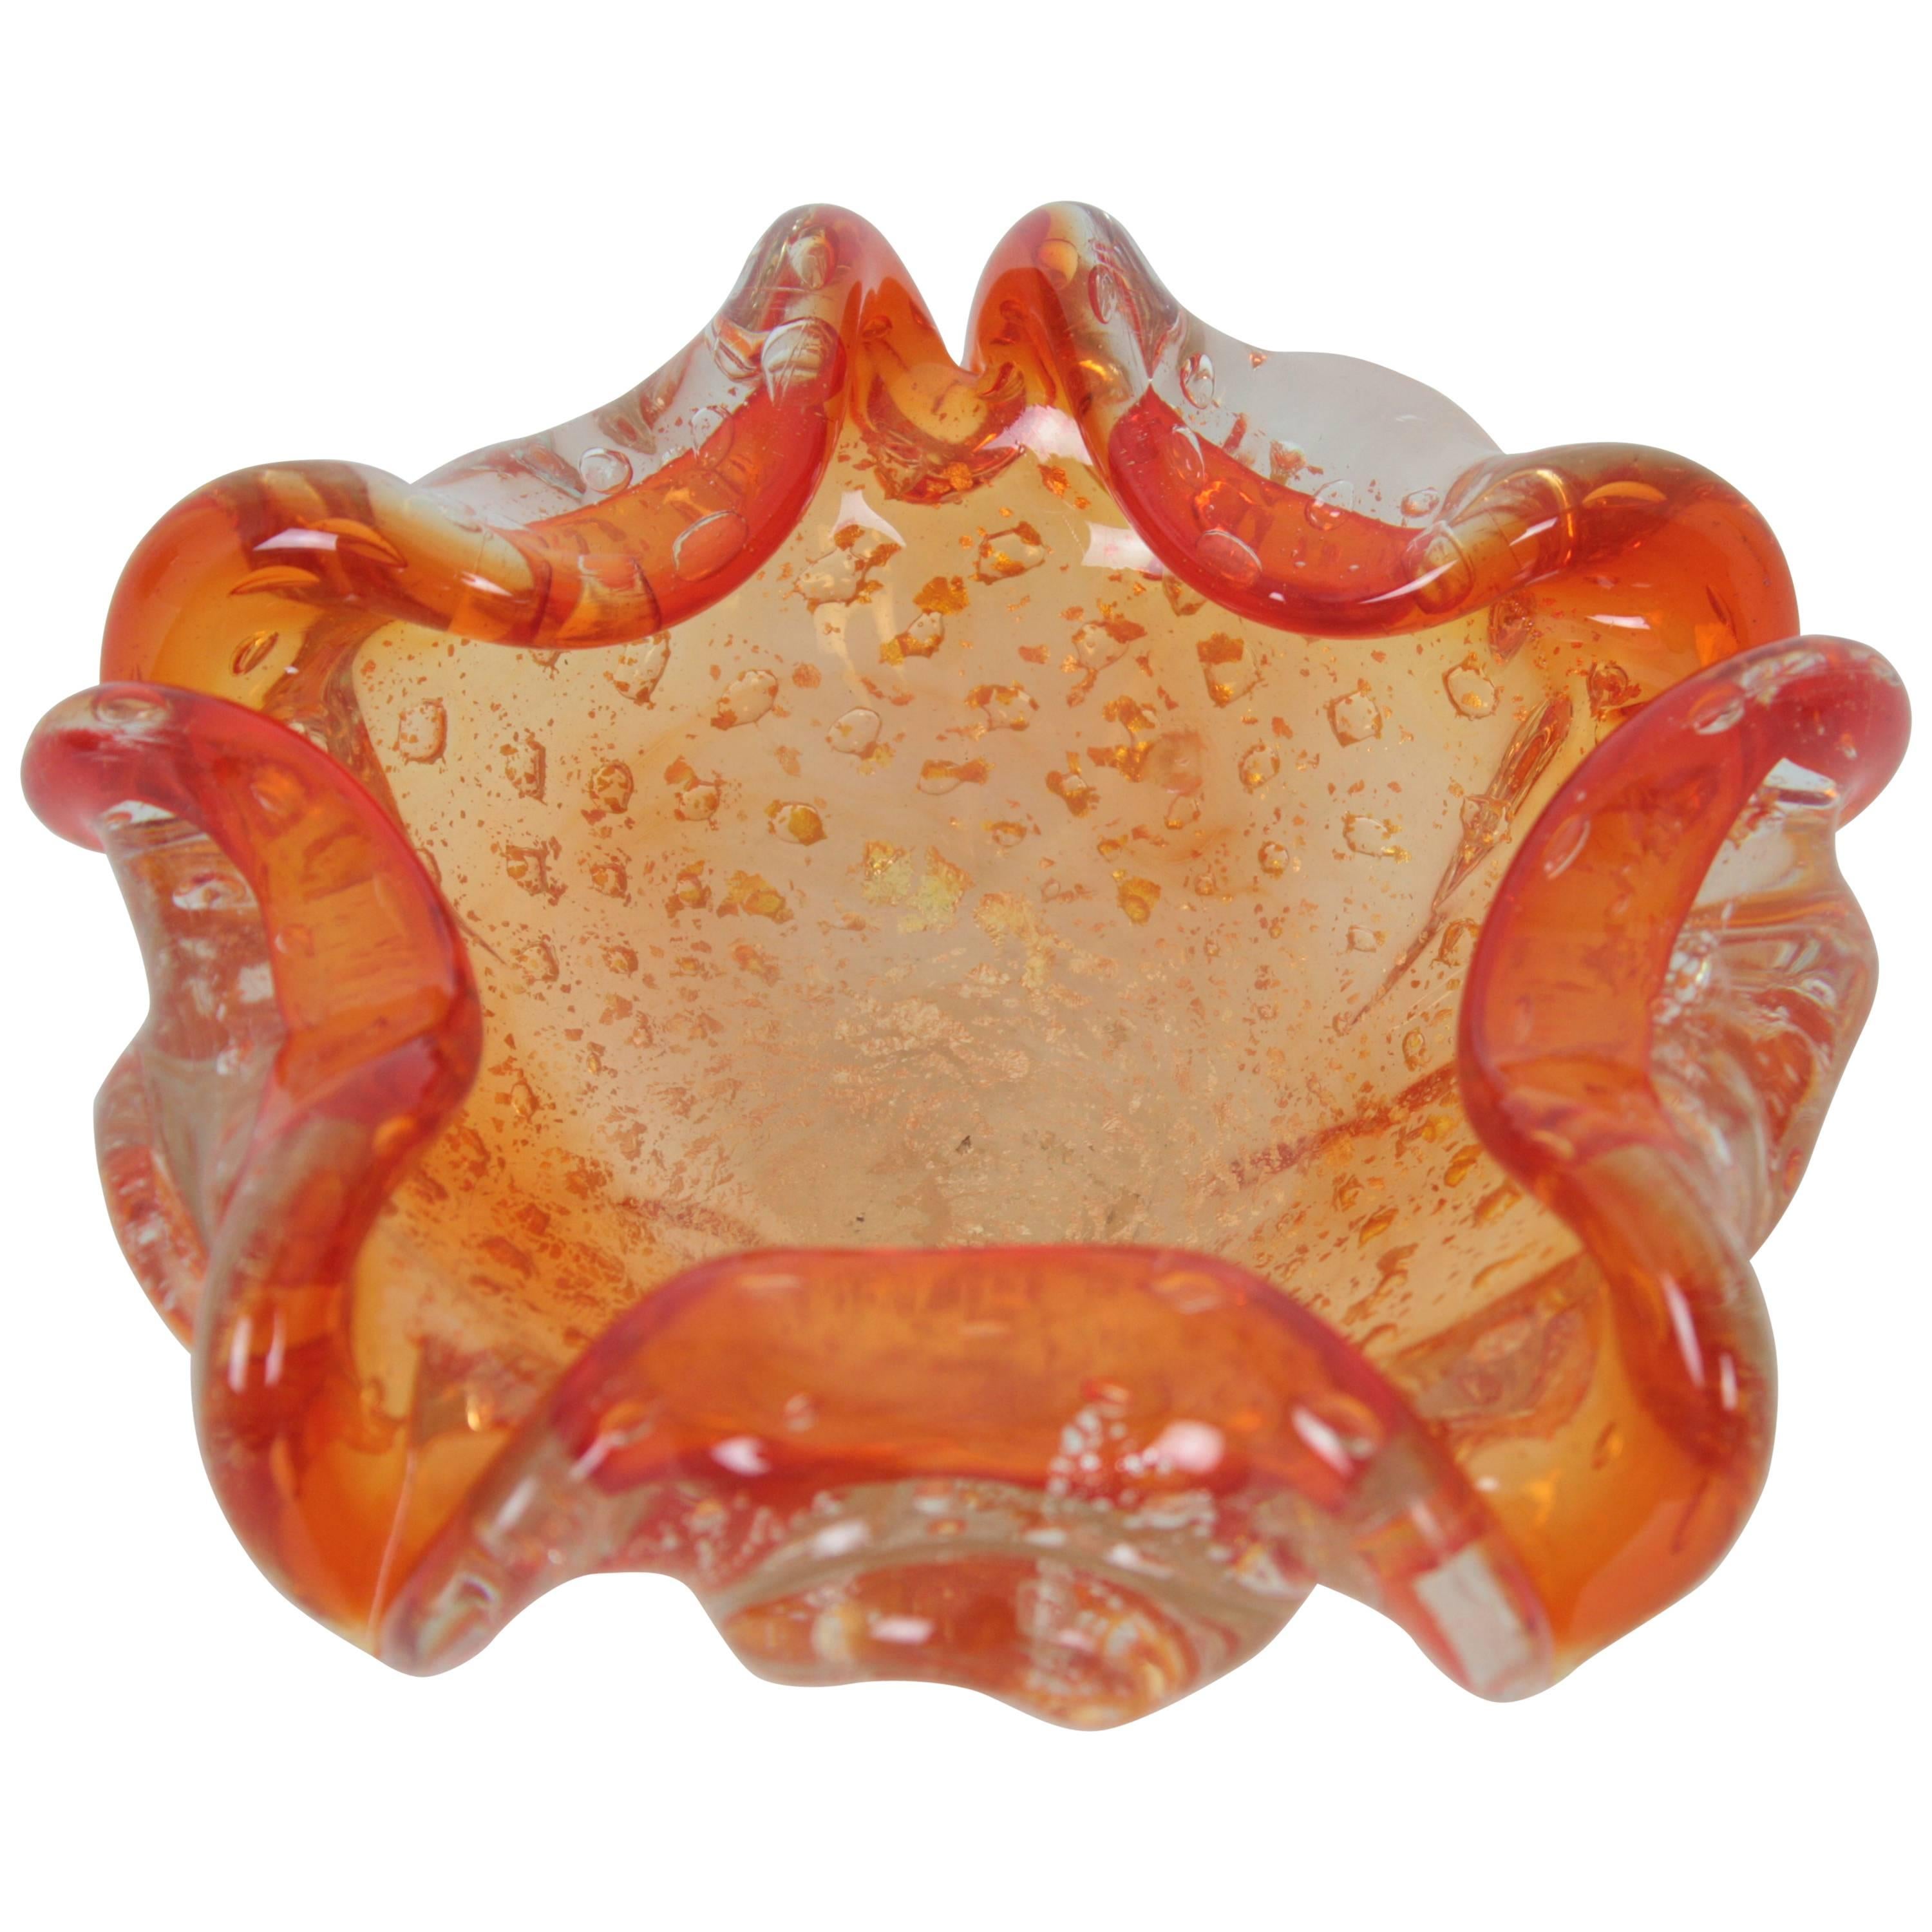 Pretty nice art glass open flower bowl or ashtray with clear and orange glass degrade and aventurine silver flecks.
This piece is in mint condition. Vibrant color and amazing design,
Italy, 1950s.

Available a huge collection of Murano glass